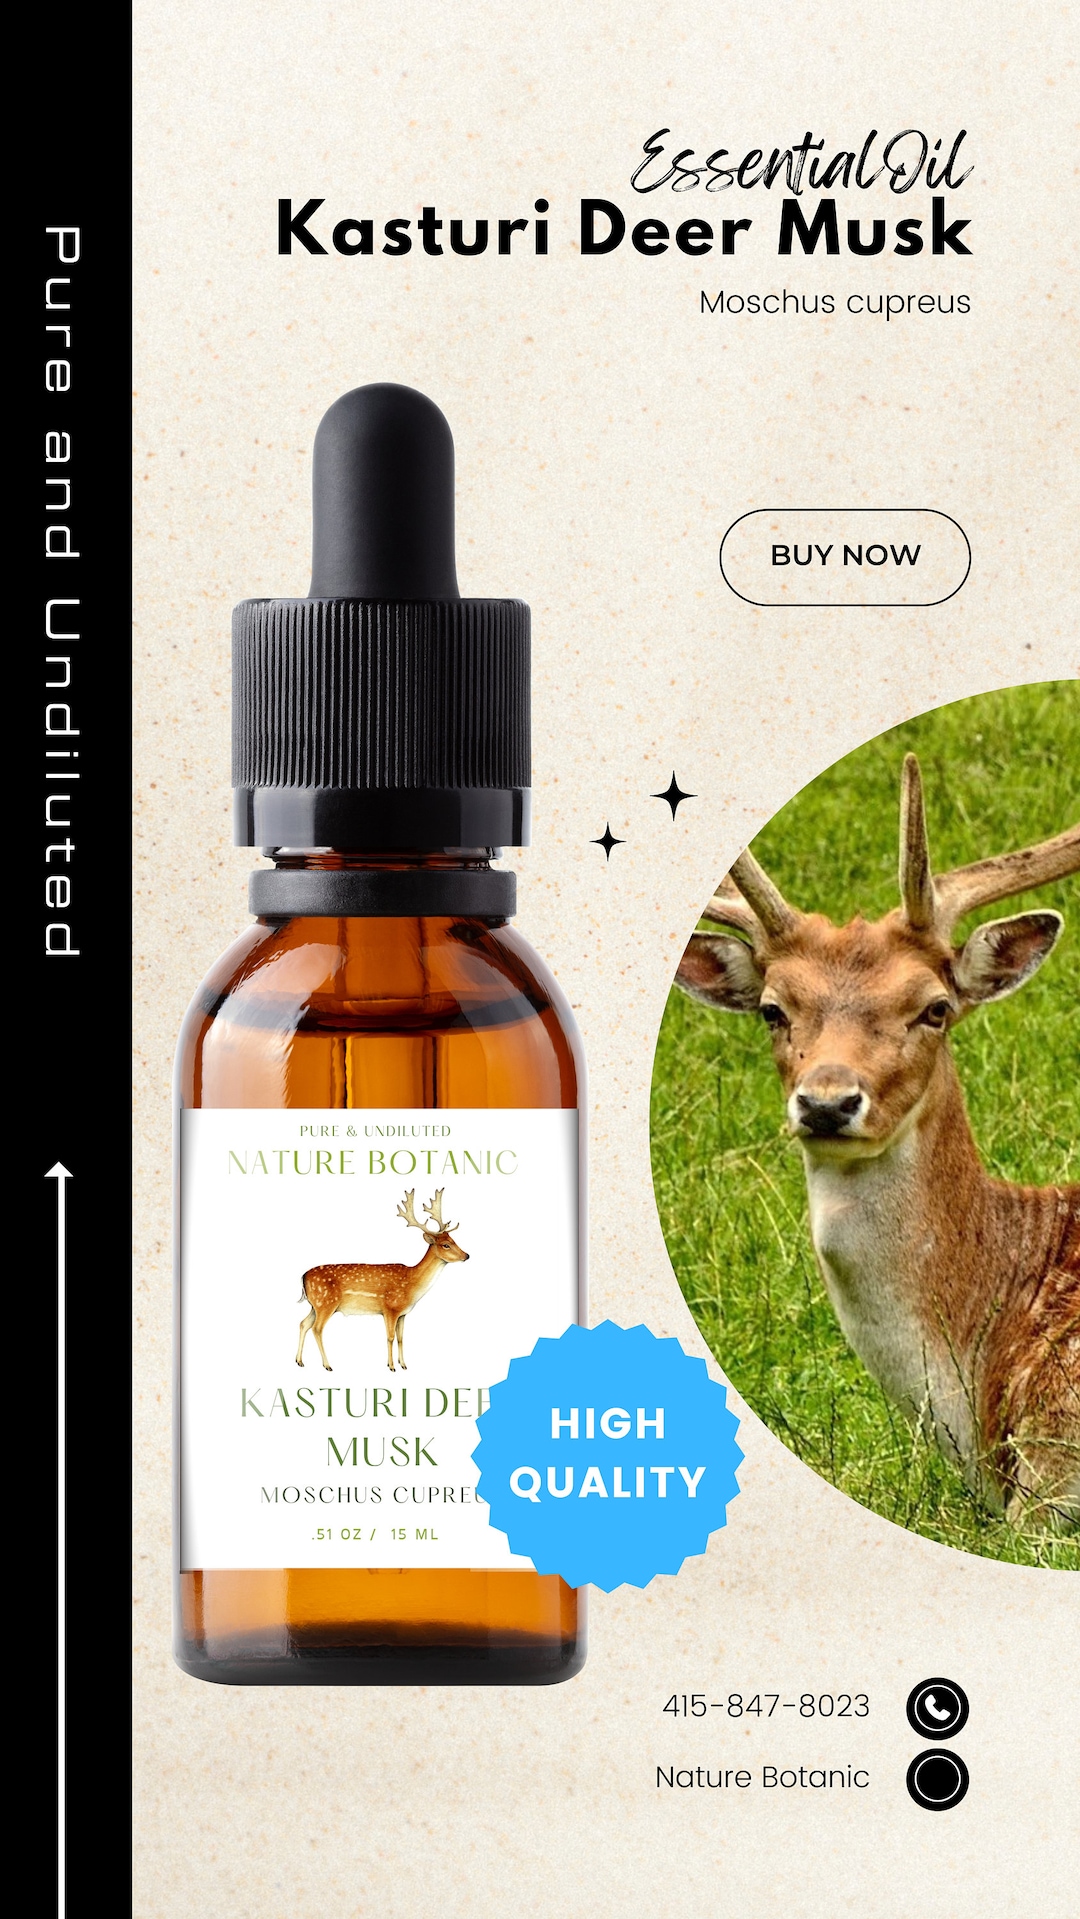 Chinese Wild deer musk oil - non-alcoholic(3cc) fragra 